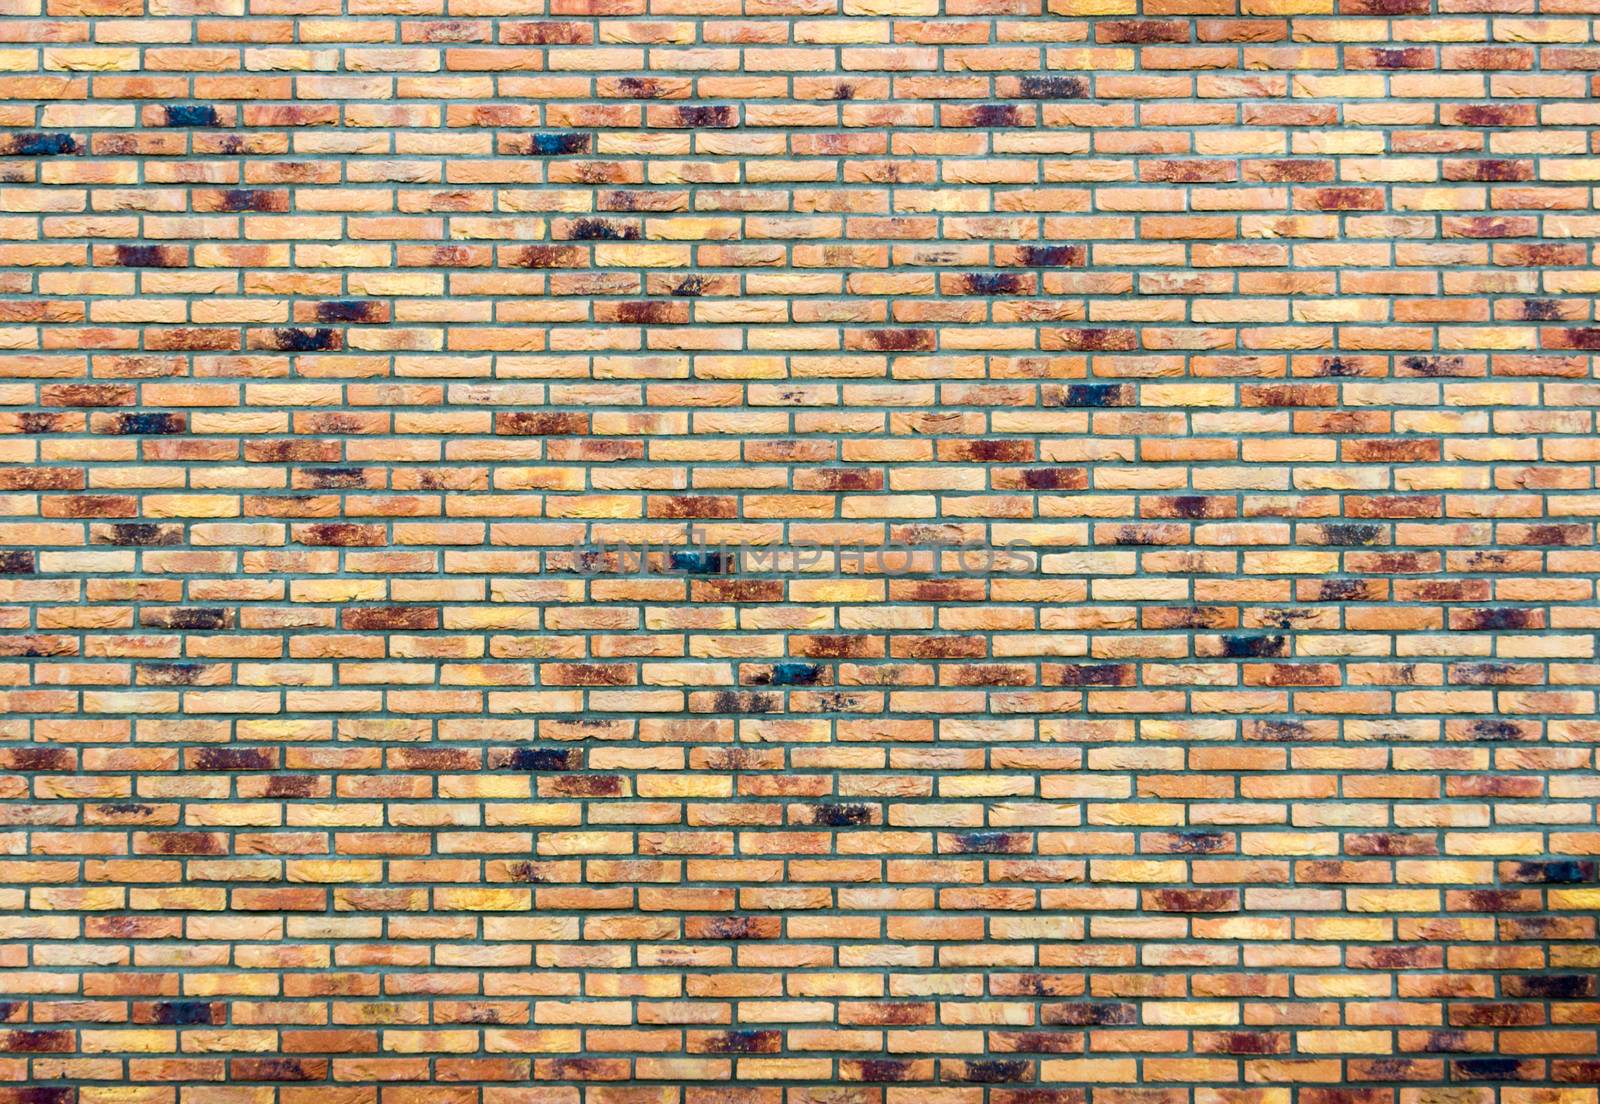 Brick wall with several colors by BenSchonewille